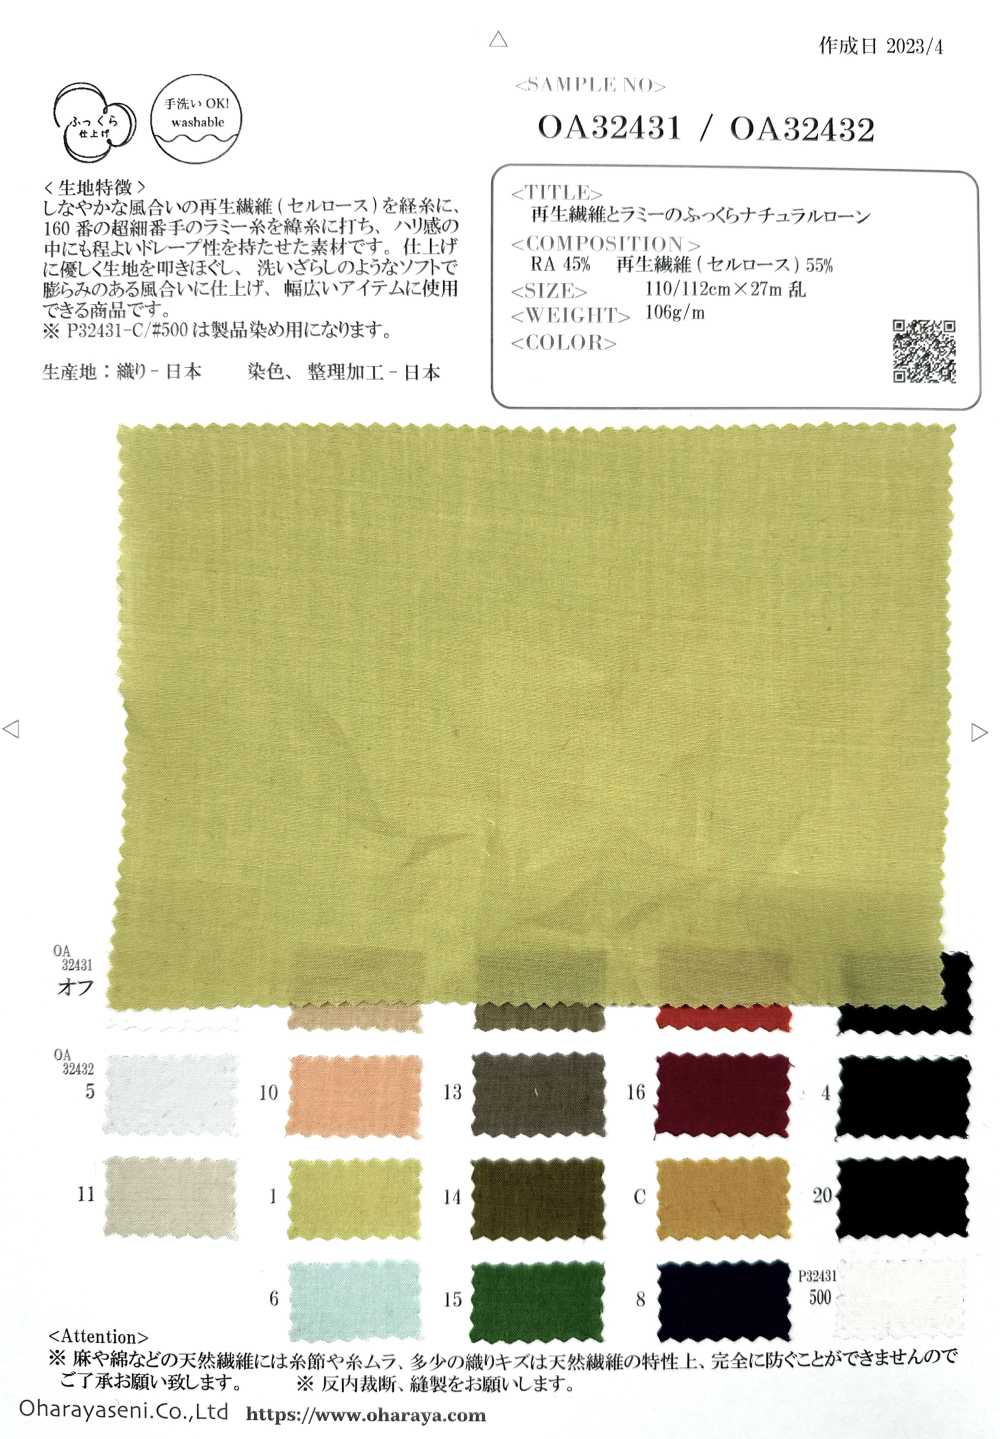 OA32431 Plump Natural Lawn Made From Recycled Fibers And Ramie[Textile / Fabric] Oharayaseni